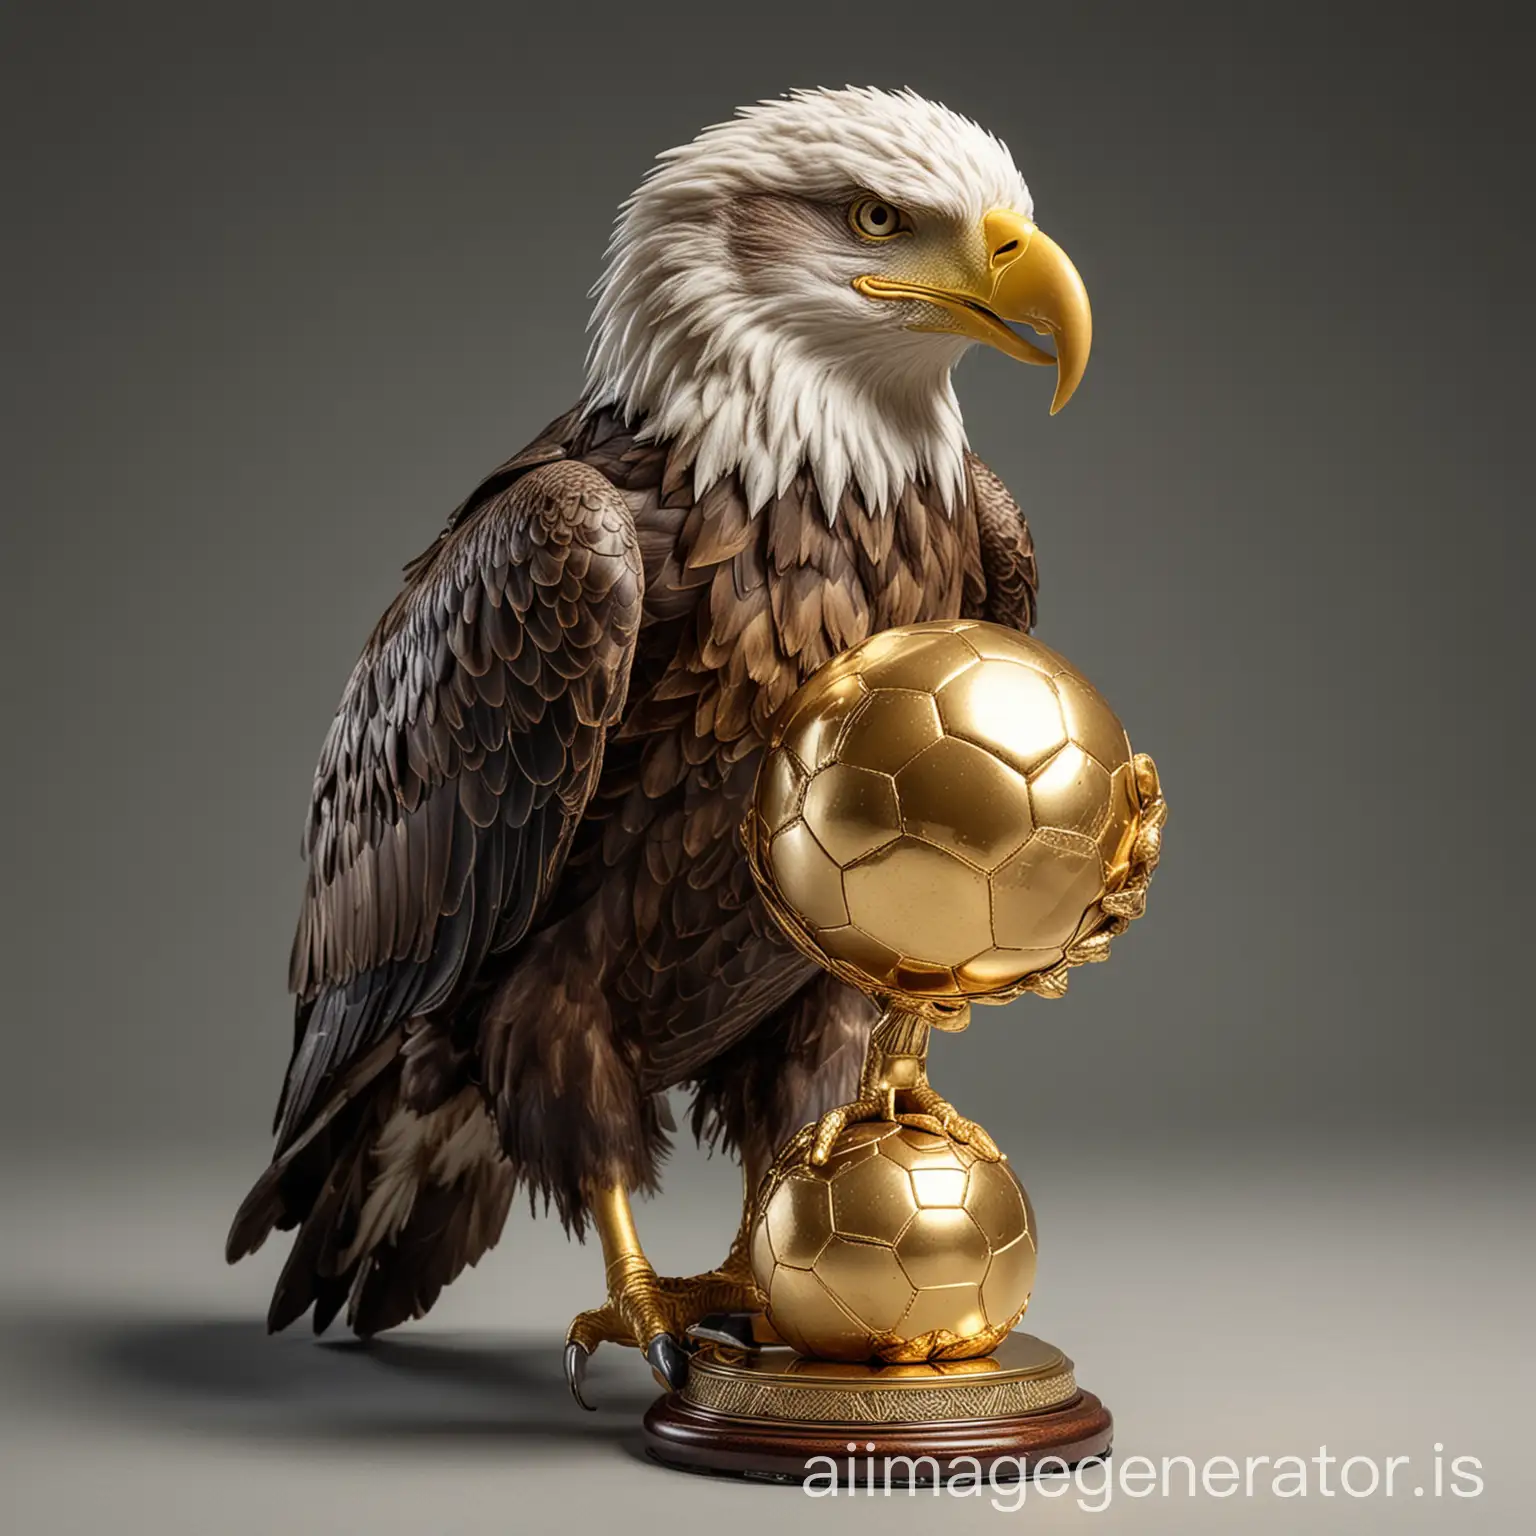 an eagle holding a golden soccer ball in the form of a trophy